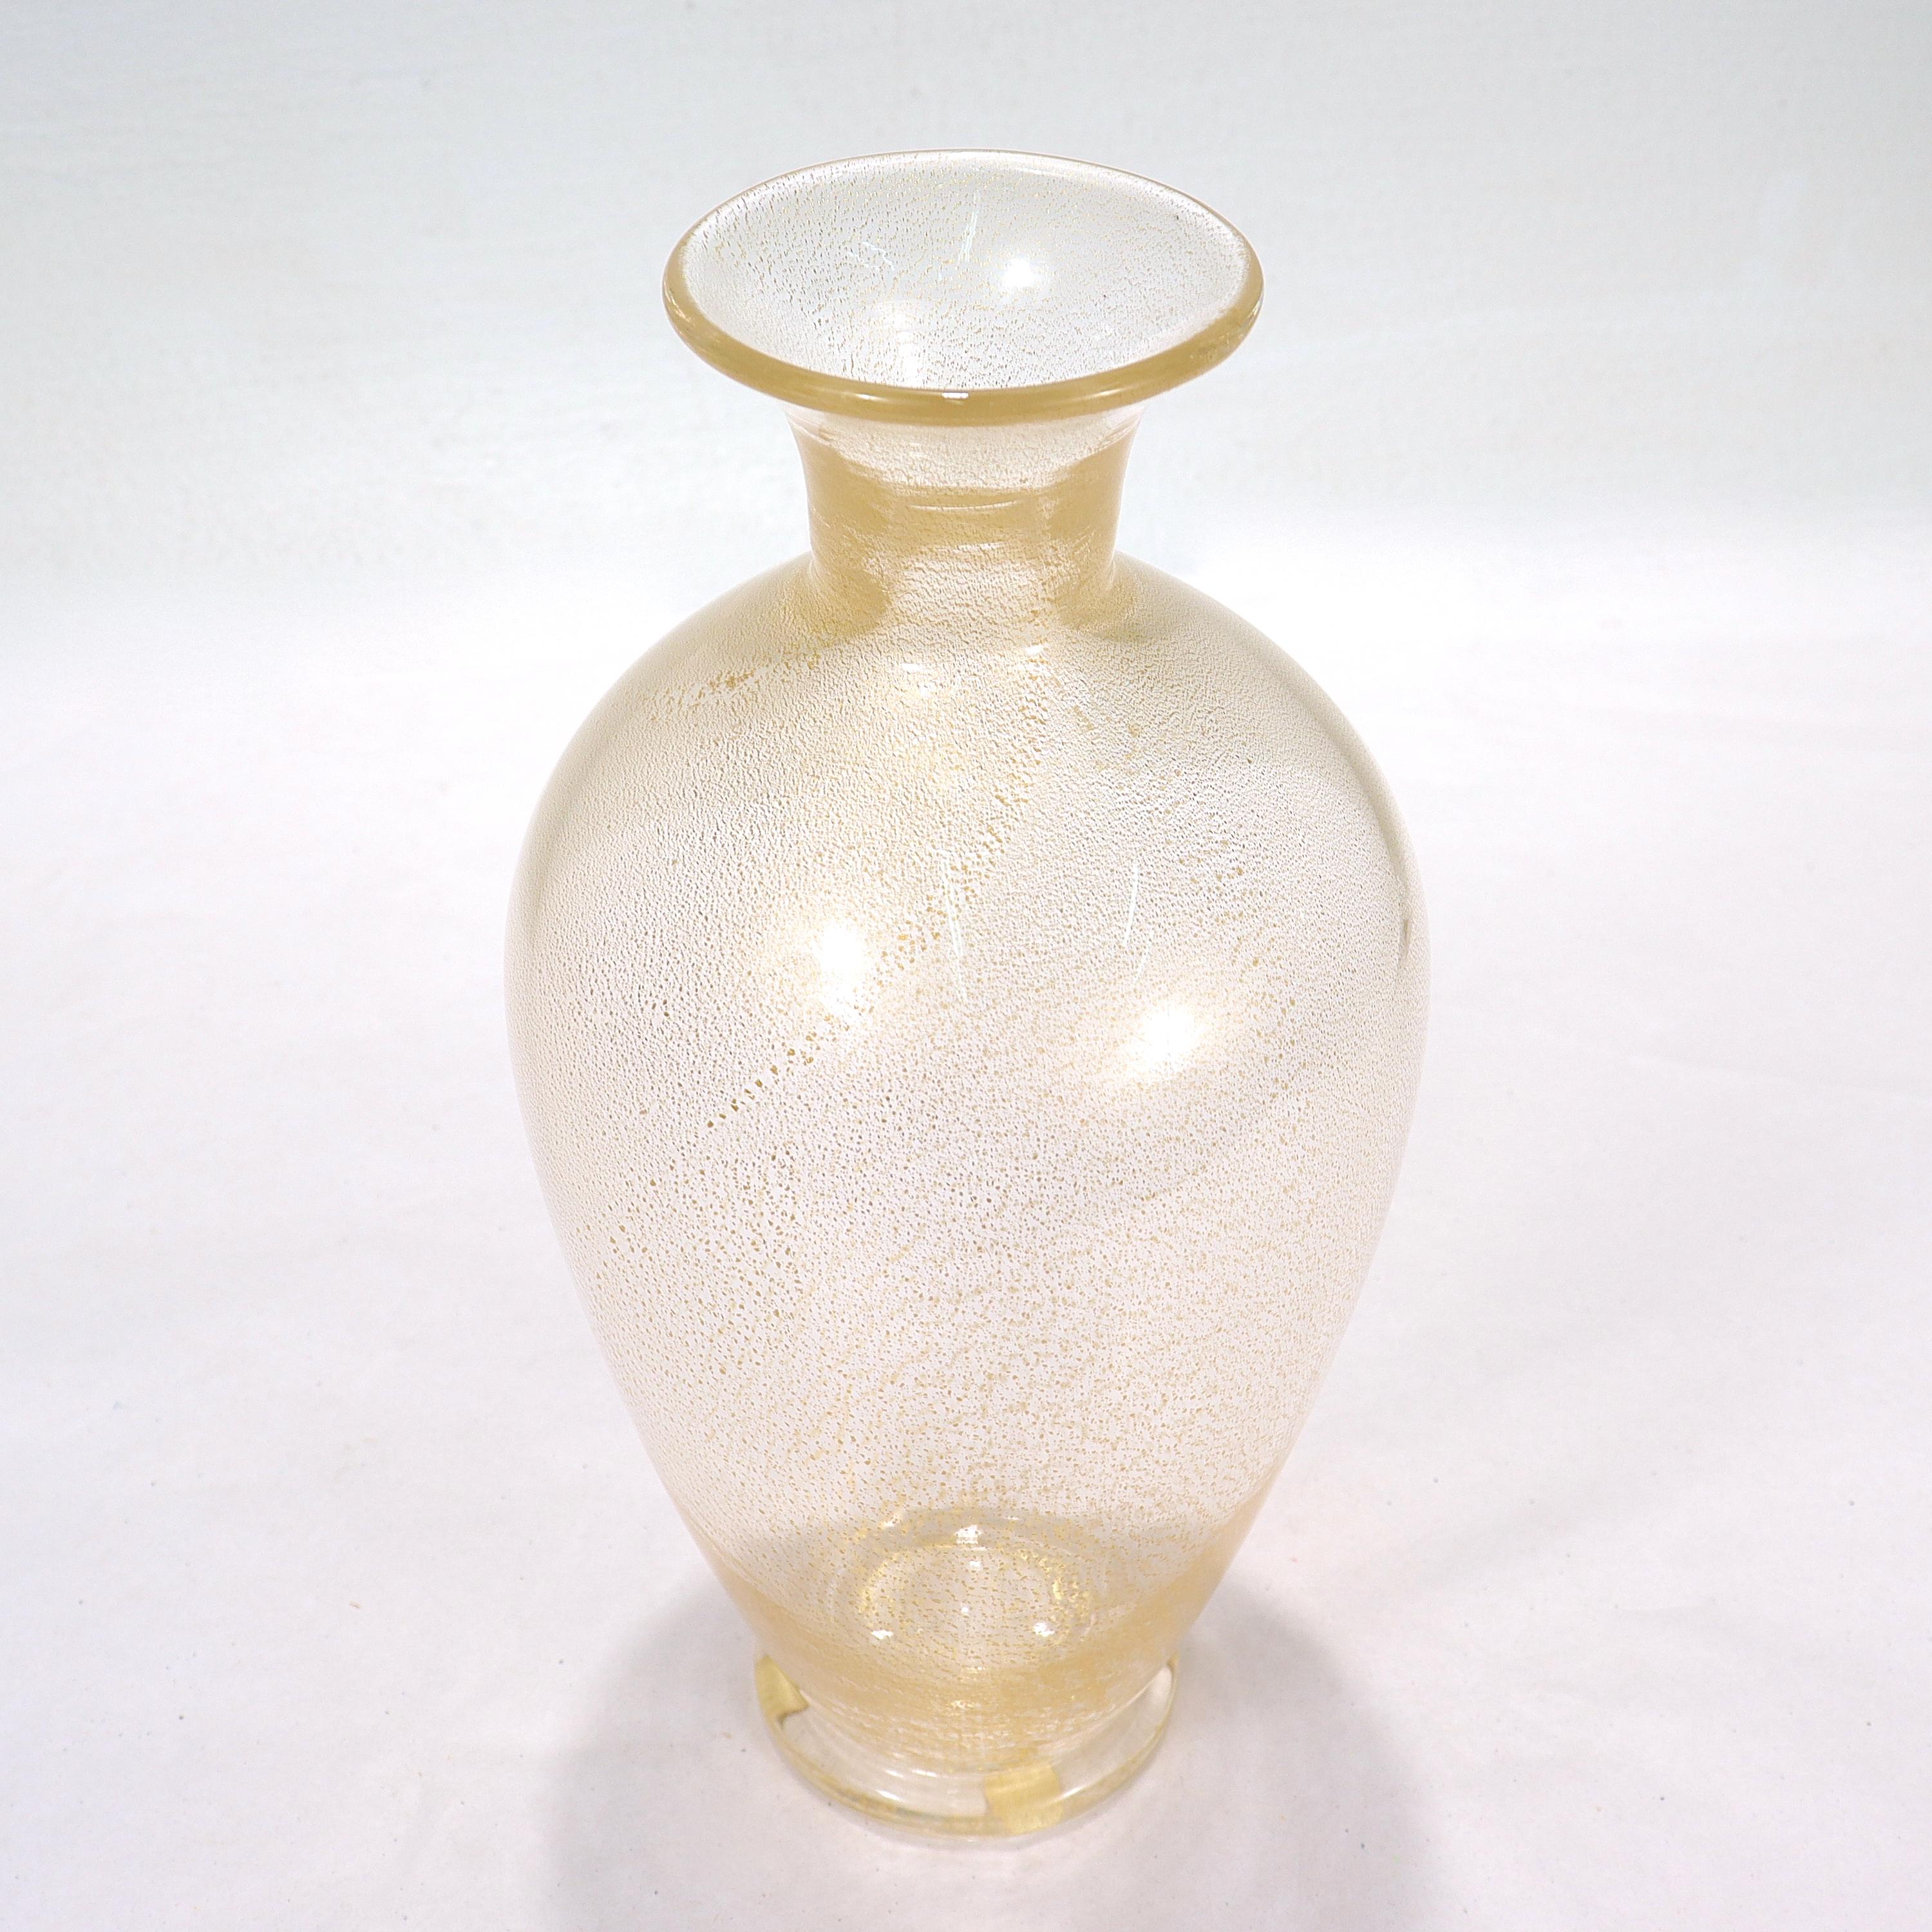 Italian Signed Archimede Seguso Mid-Century Murano or Venetian Glass Vase with Gold Foil